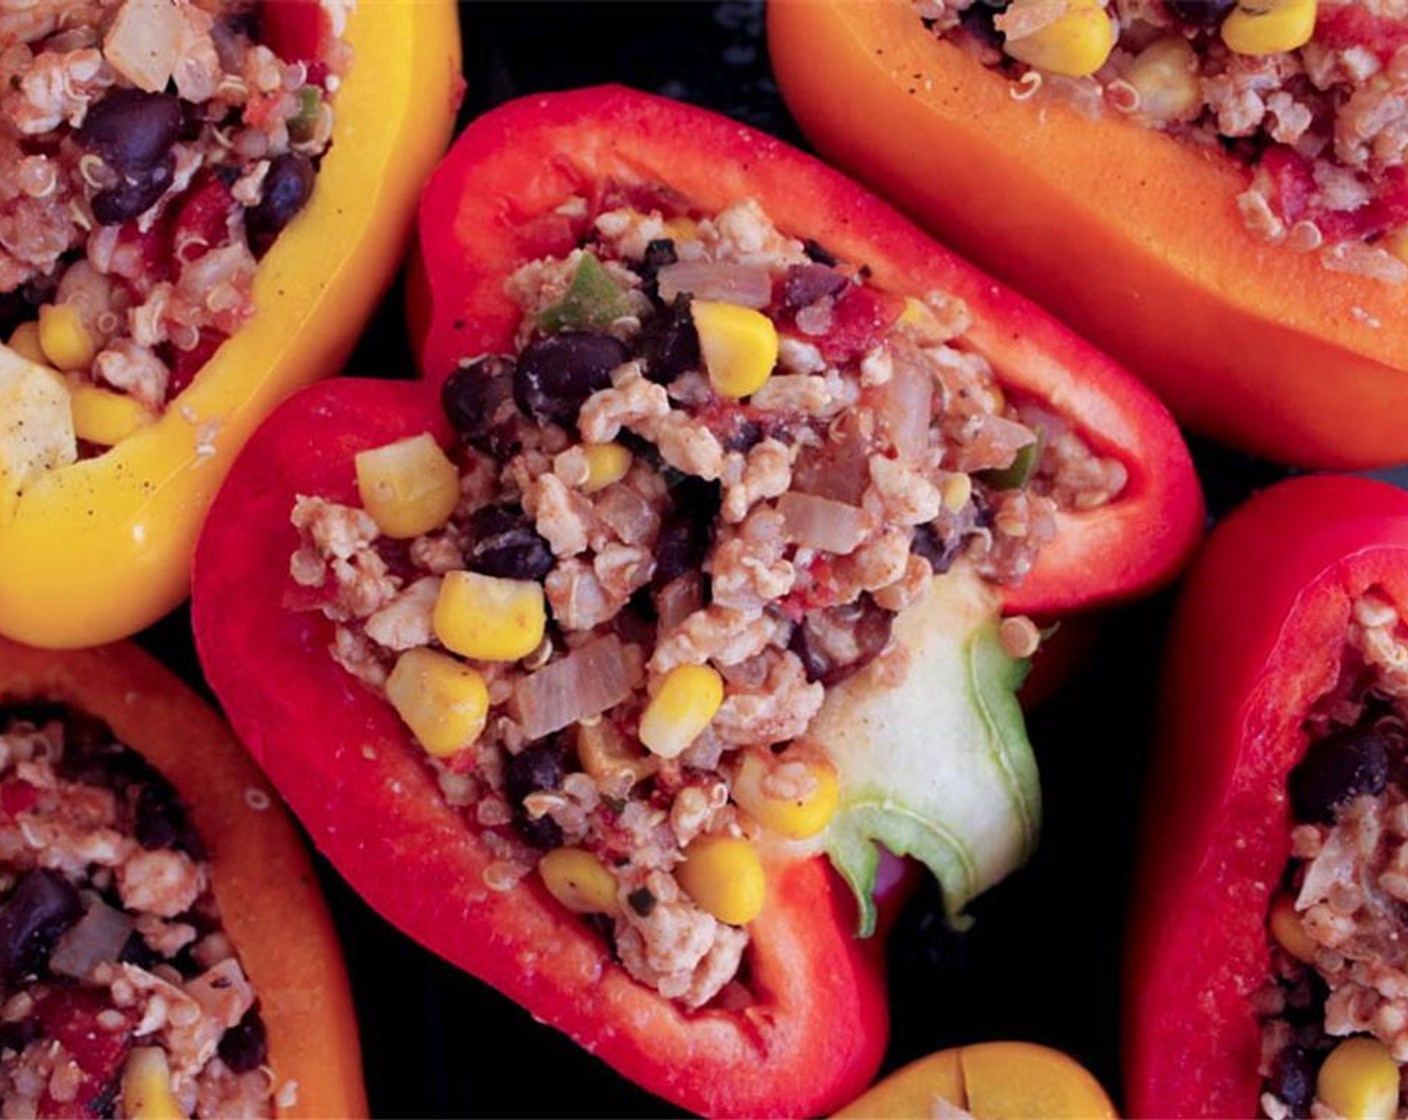 step 11 Pour the Low-Sodium Vegetable Broth (3/4 cup) into the skillet or baking dish, and cover the dish with foil. Transfer your stuffed peppers to the oven and bake for 25-30 minutes until the peppers are tender.